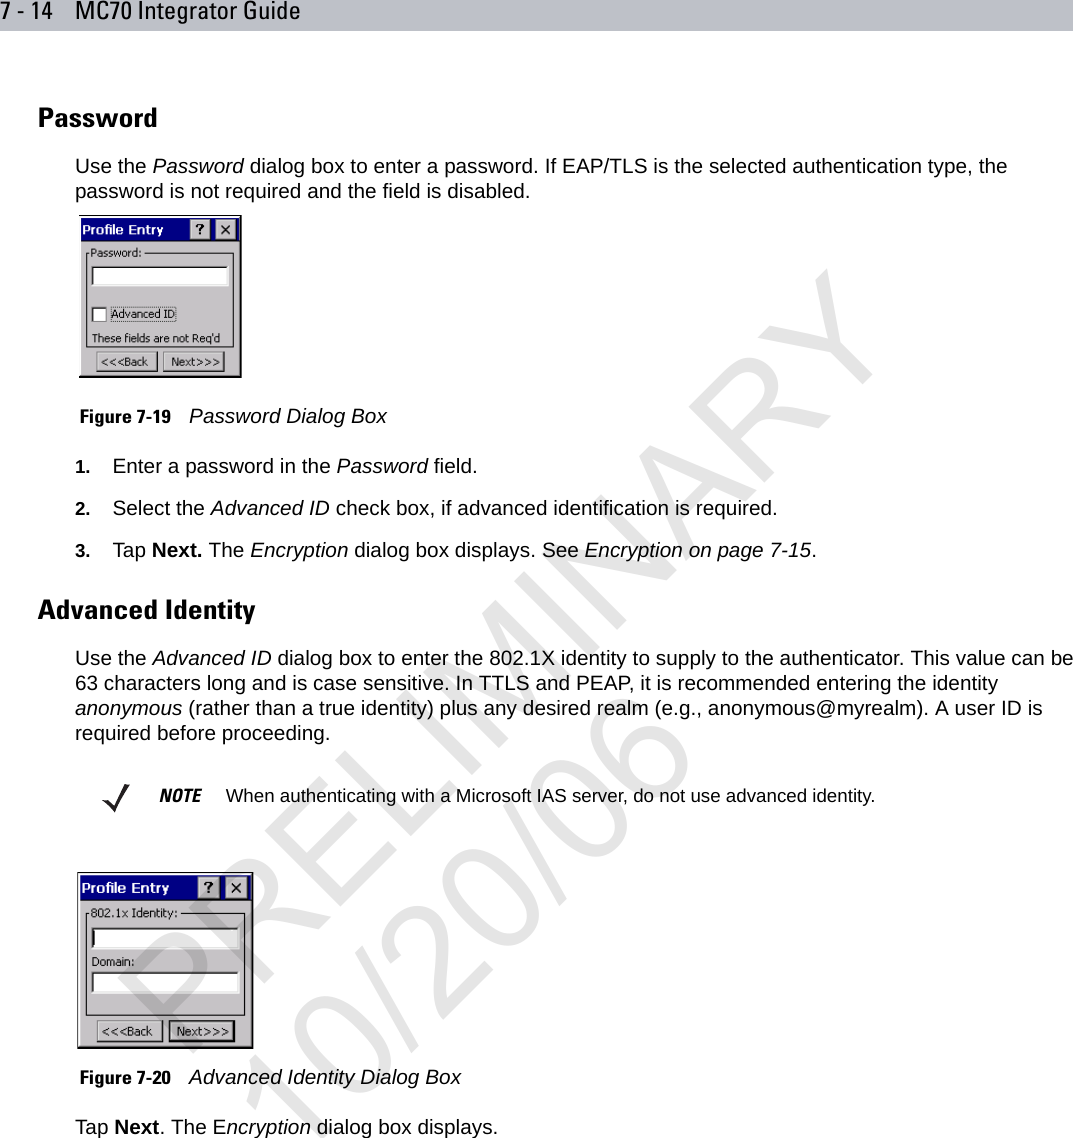 7 - 14 MC70 Integrator GuidePasswordUse the Password dialog box to enter a password. If EAP/TLS is the selected authentication type, the password is not required and the field is disabled. Figure 7-19    Password Dialog Box1. Enter a password in the Password field.2. Select the Advanced ID check box, if advanced identification is required. 3. Tap Next. The Encryption dialog box displays. See Encryption on page 7-15.Advanced IdentityUse the Advanced ID dialog box to enter the 802.1X identity to supply to the authenticator. This value can be 63 characters long and is case sensitive. In TTLS and PEAP, it is recommended entering the identity anonymous (rather than a true identity) plus any desired realm (e.g., anonymous@myrealm). A user ID is required before proceeding.  Figure 7-20    Advanced Identity Dialog BoxTap Next. The Encryption dialog box displays.NOTE     When authenticating with a Microsoft IAS server, do not use advanced identity.PRELIMINARY10/20/06